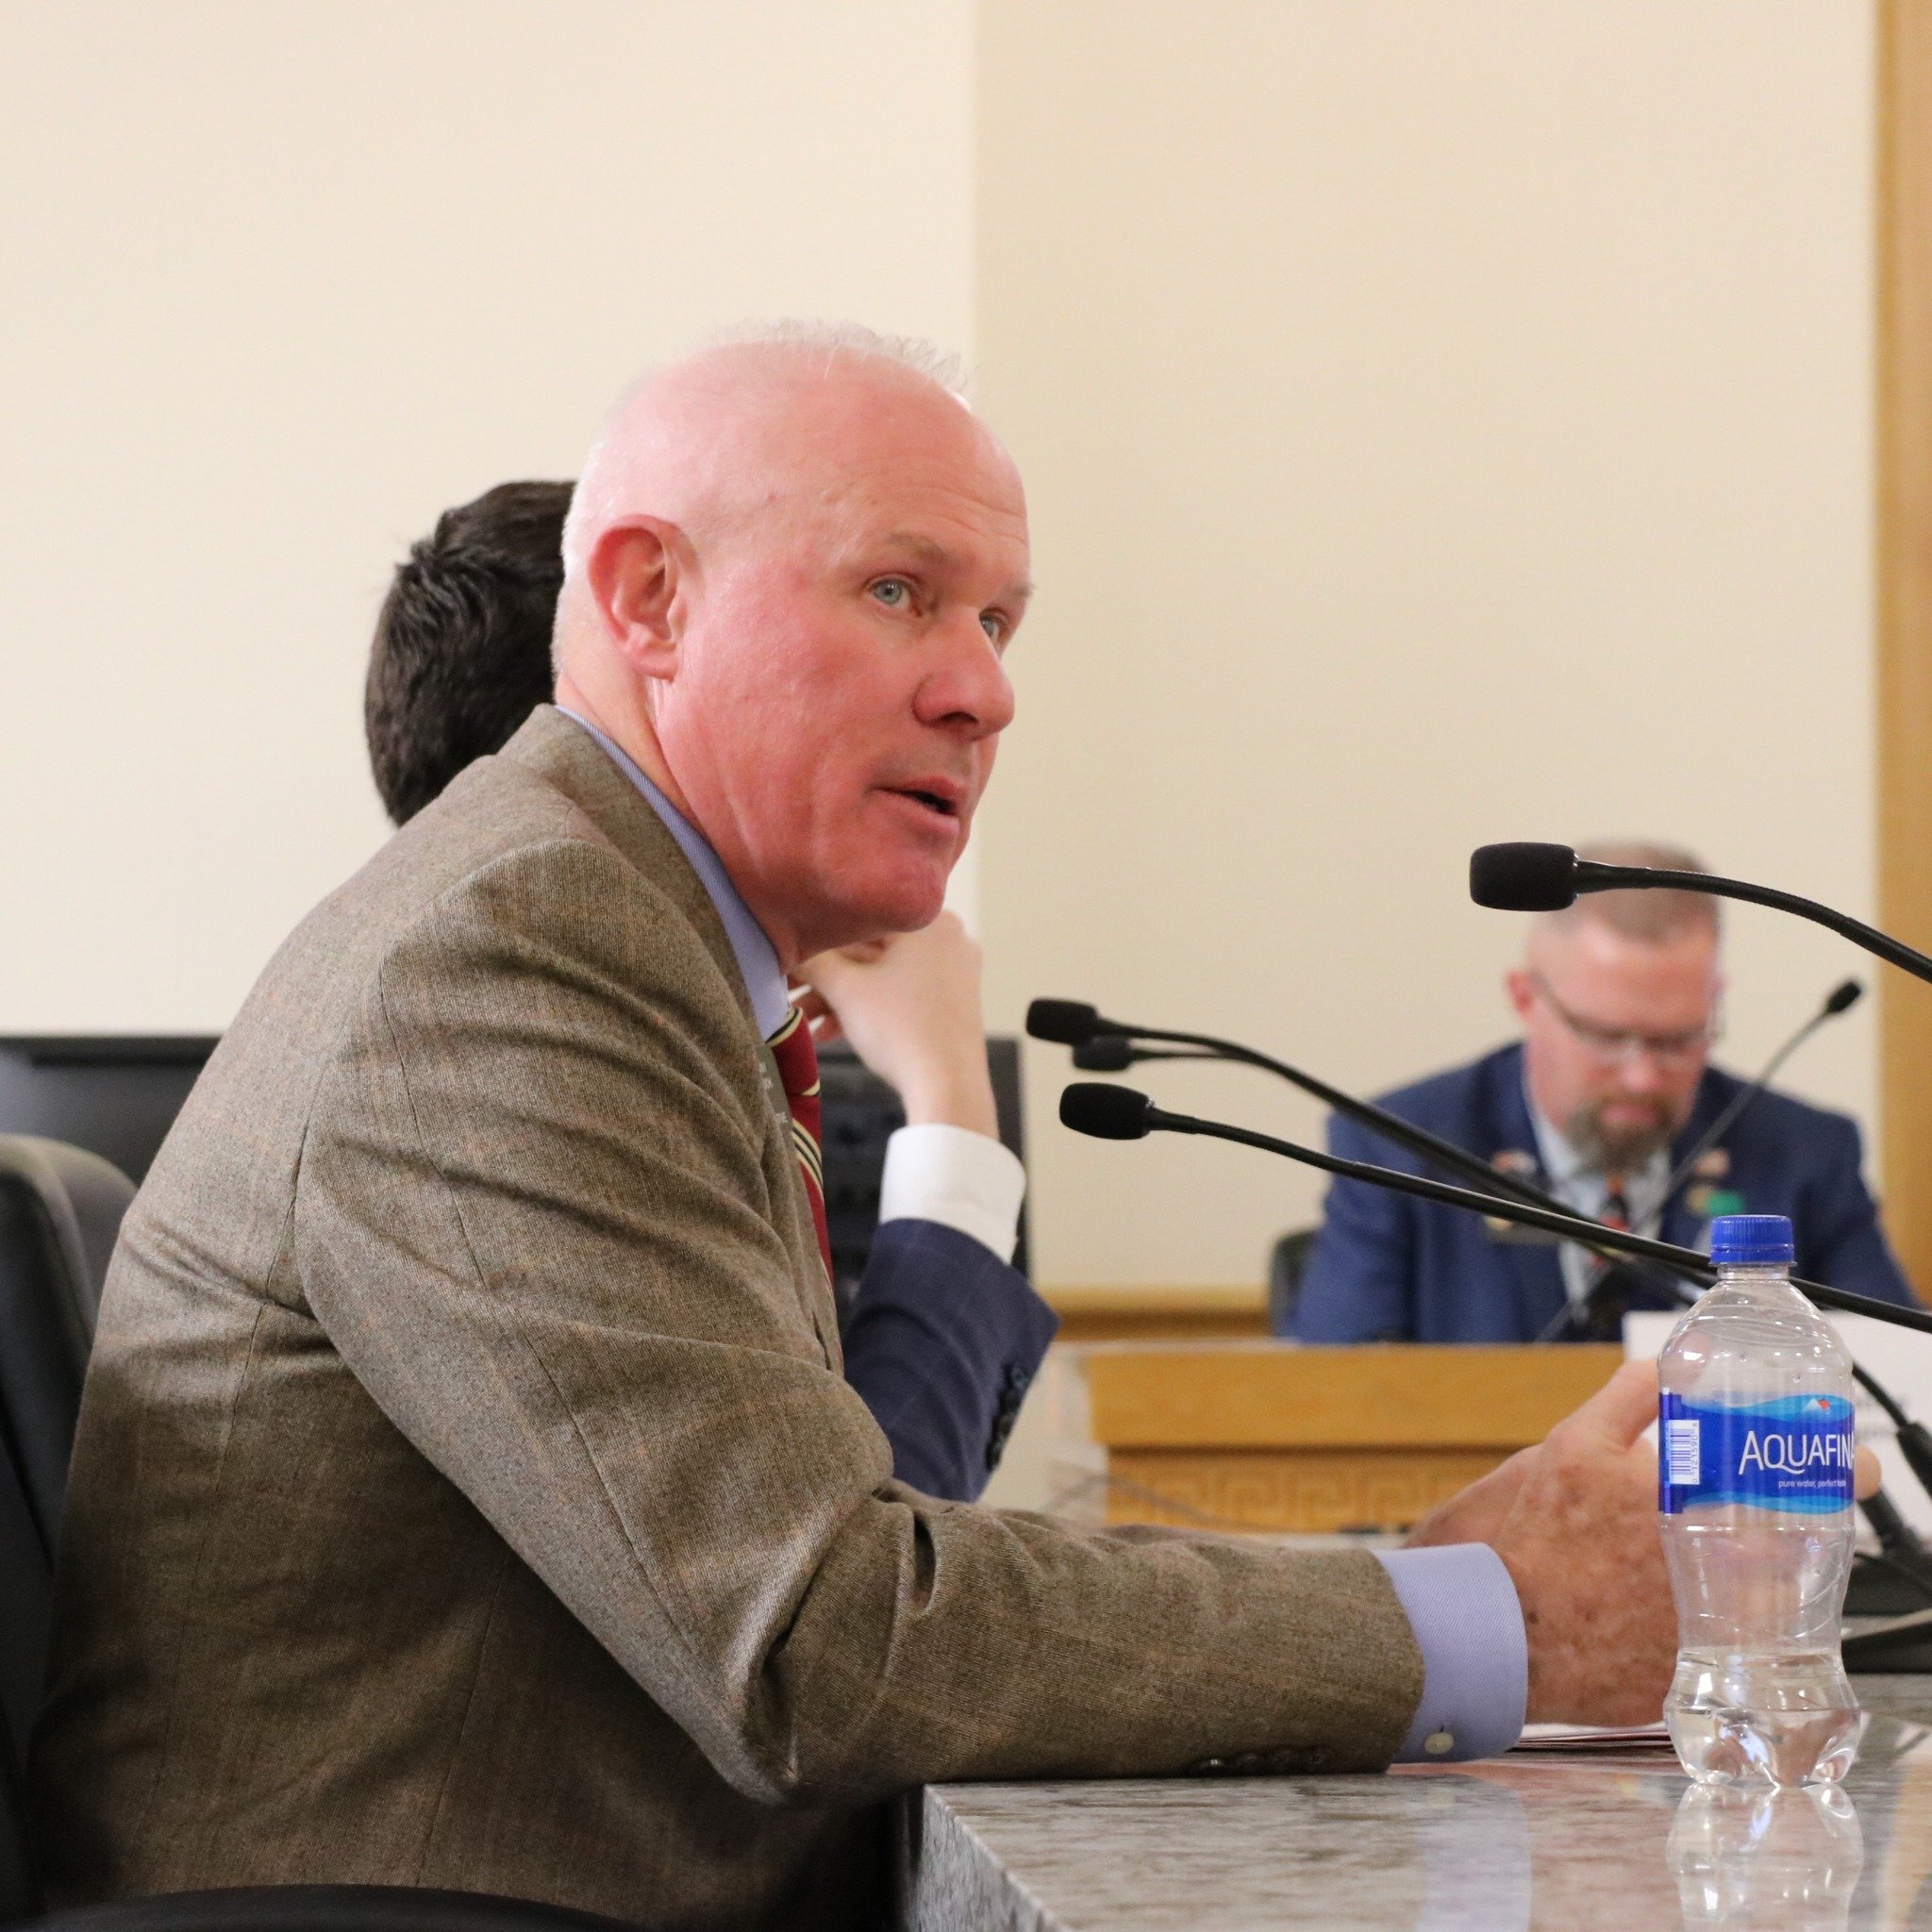 SB24-203 by Representative Anthony Hartsook aims to put these changes to the Colorado Prescription Drug Affordability Review Board (PDAB) in place.

By consulting with the Colorado Rare Disease Advisory Council, the PDAB will be less likely to stifle